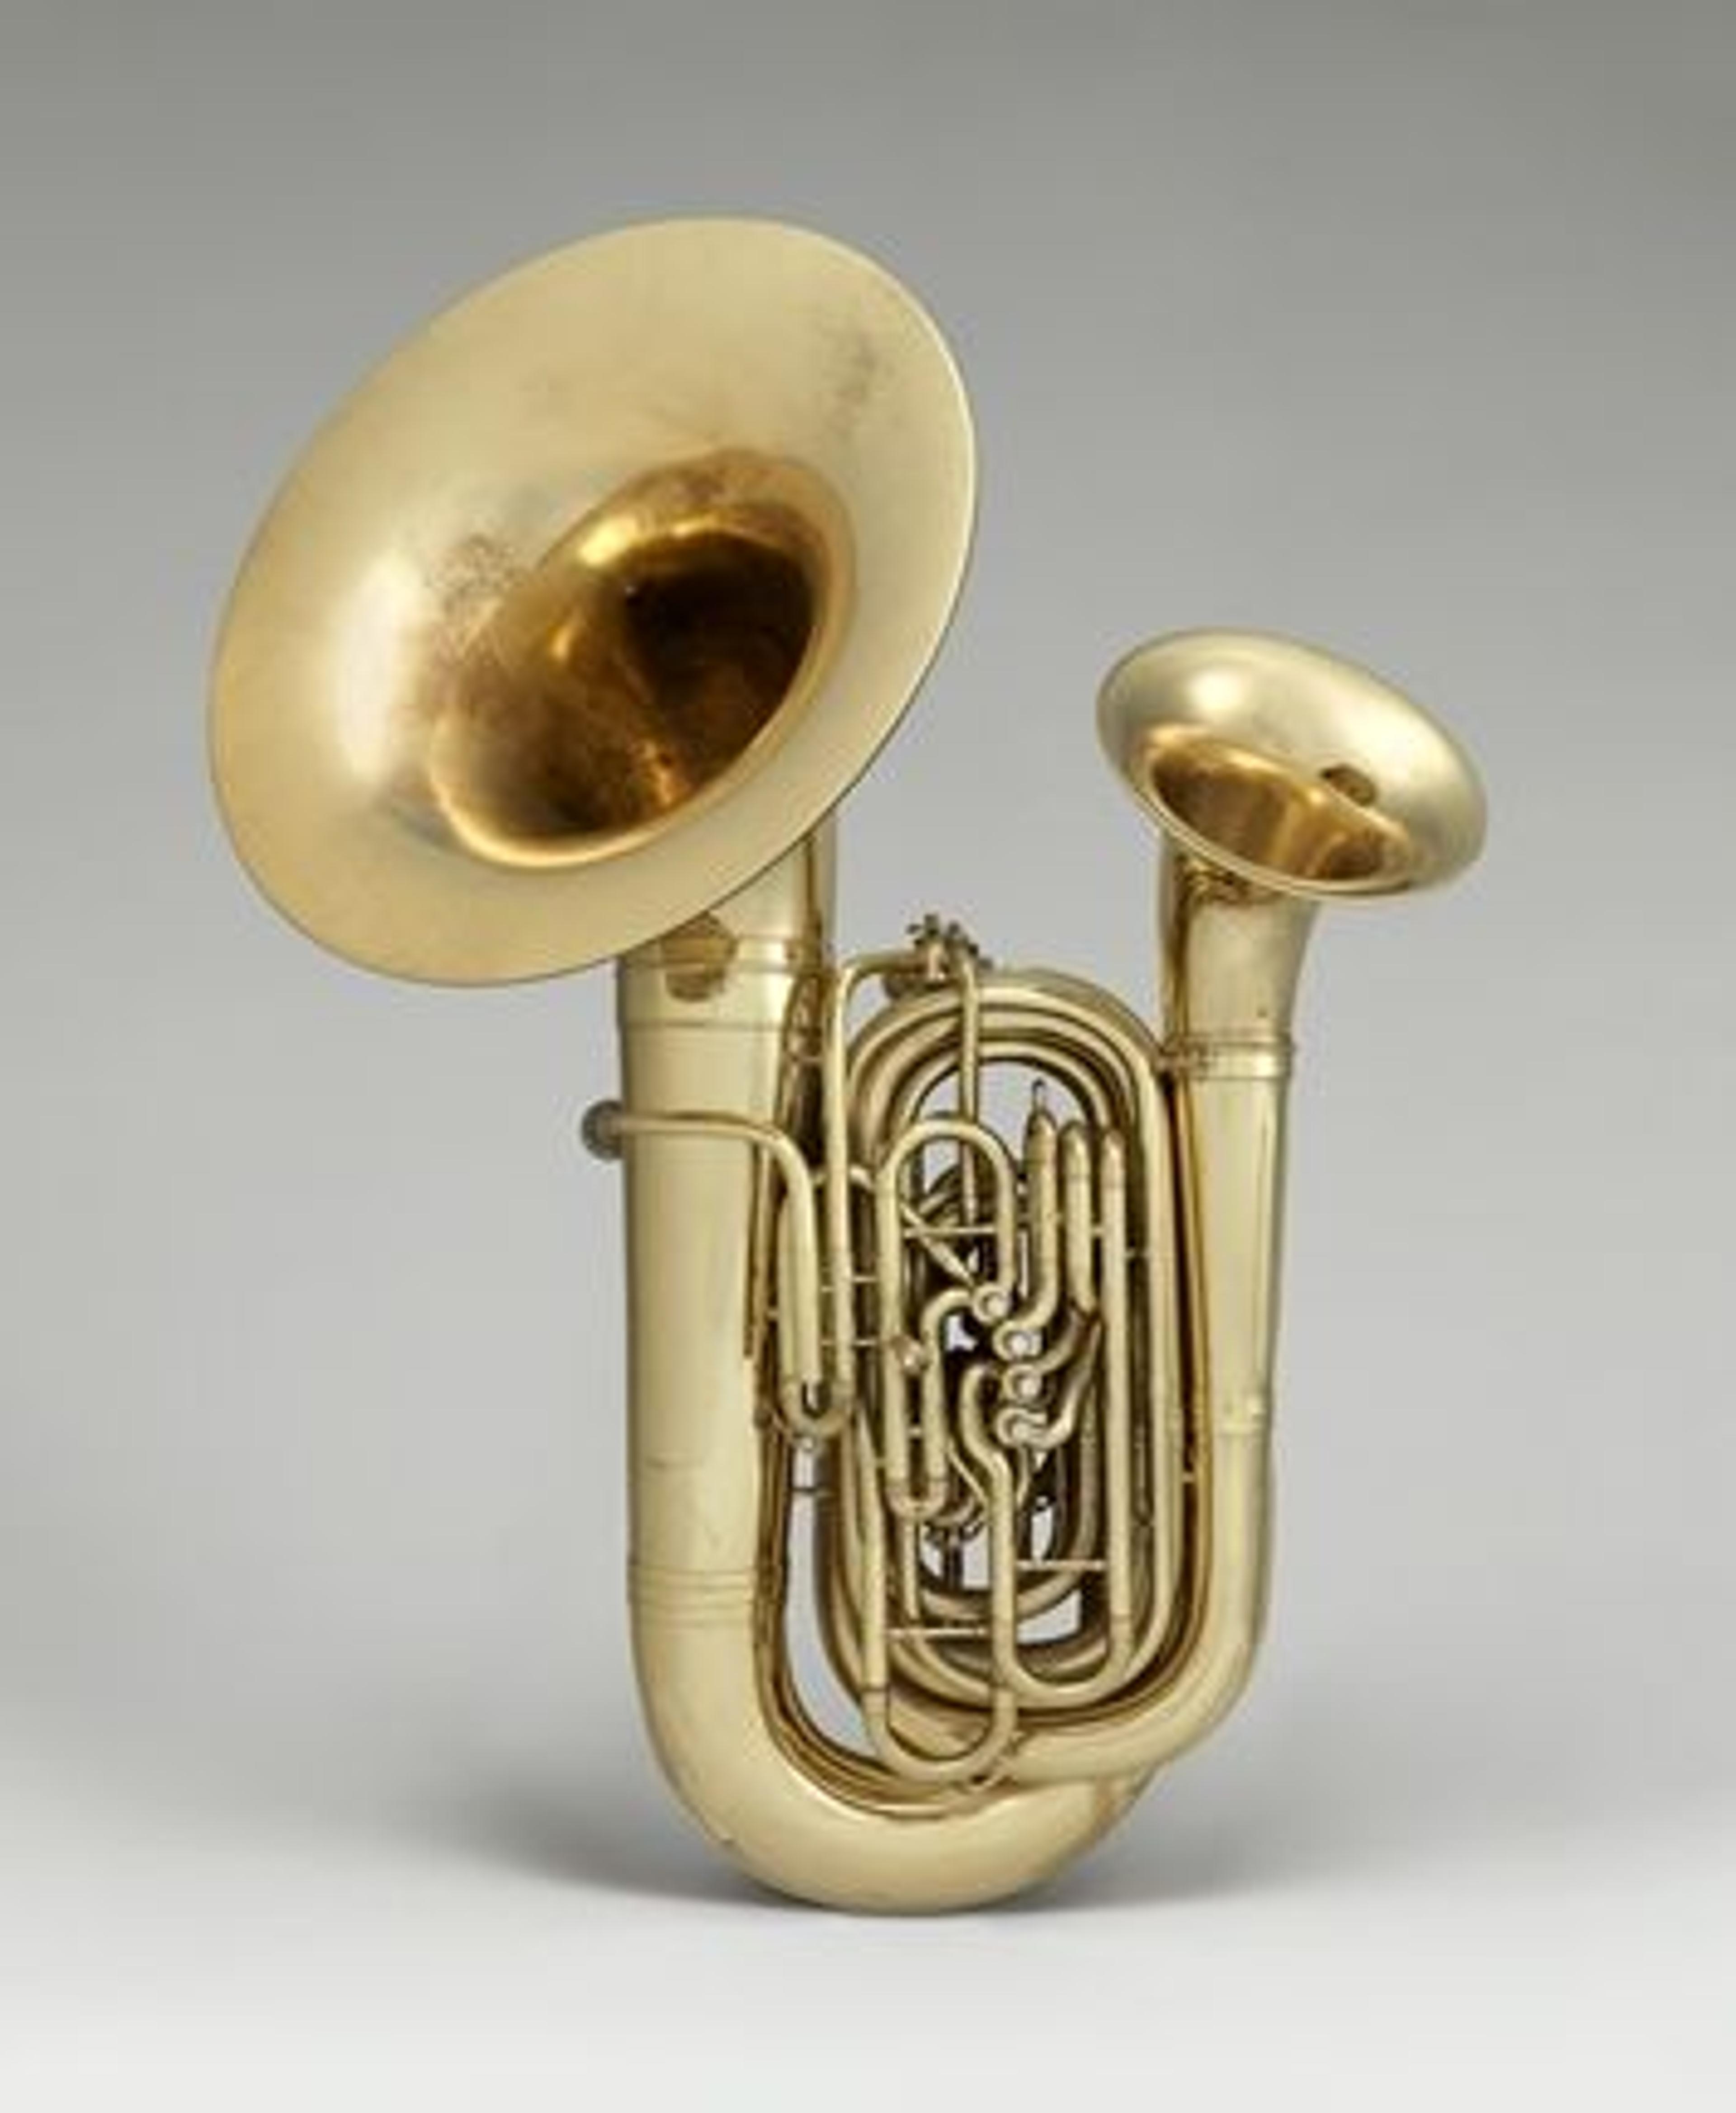 A brass instrument with two bells against a grey background